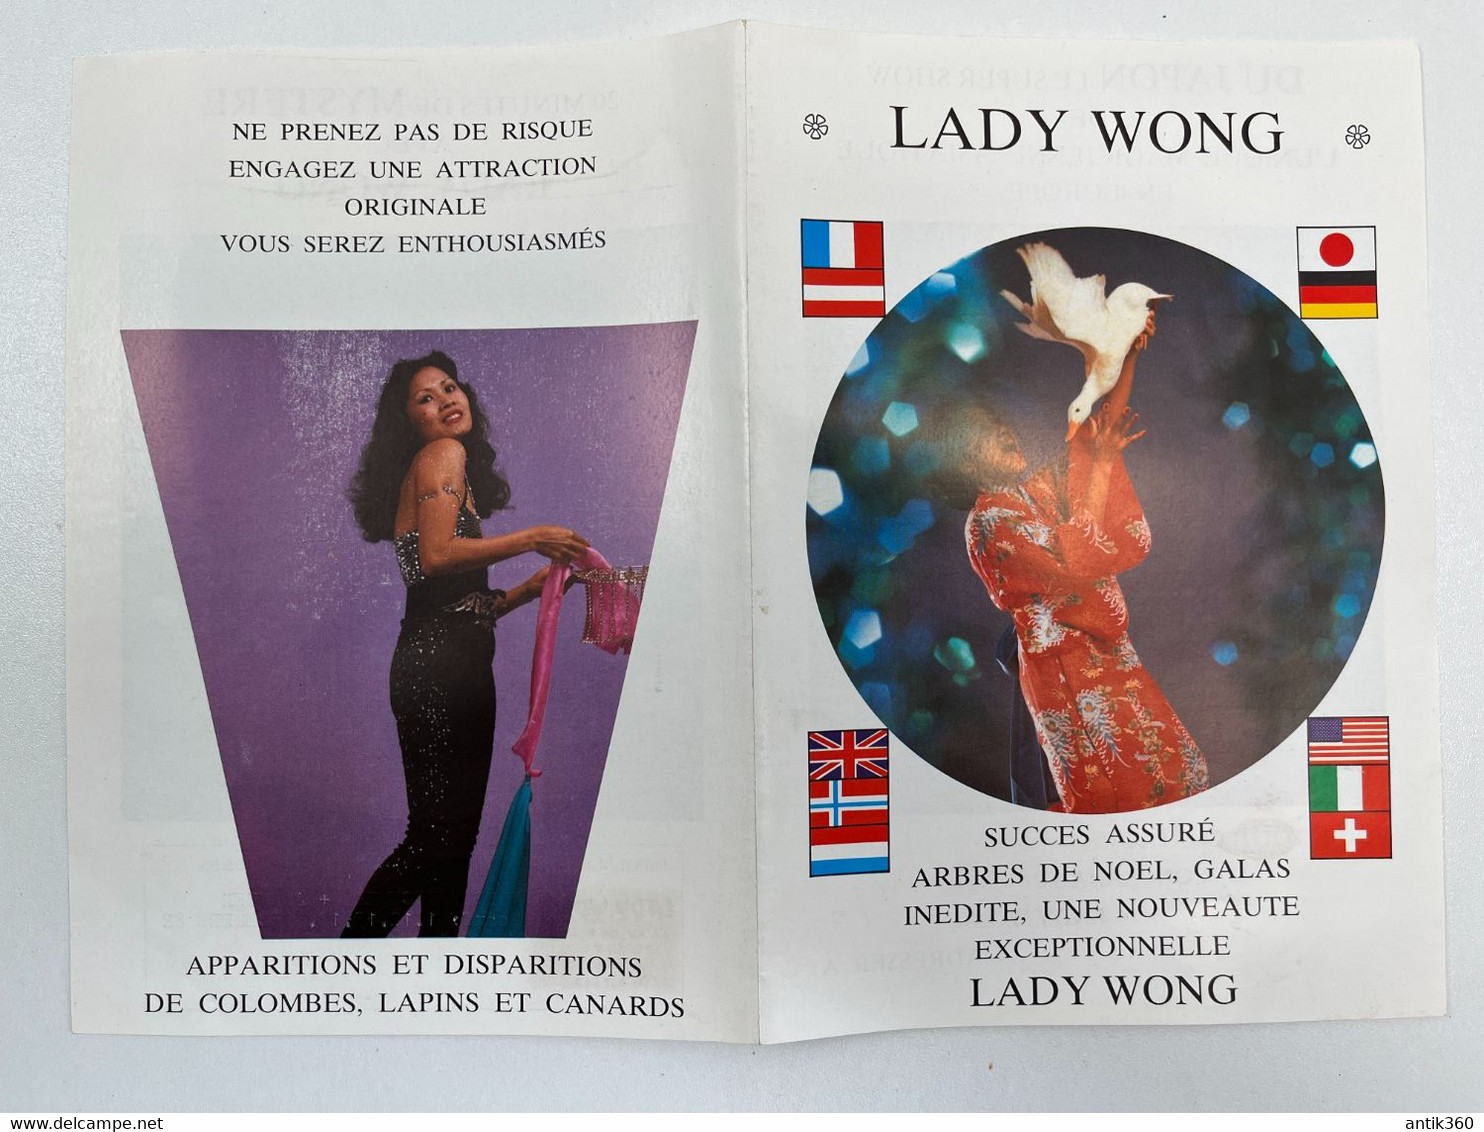 Cirque - Brochure Spectacle Magicienne LADY WONG Magie - Programme